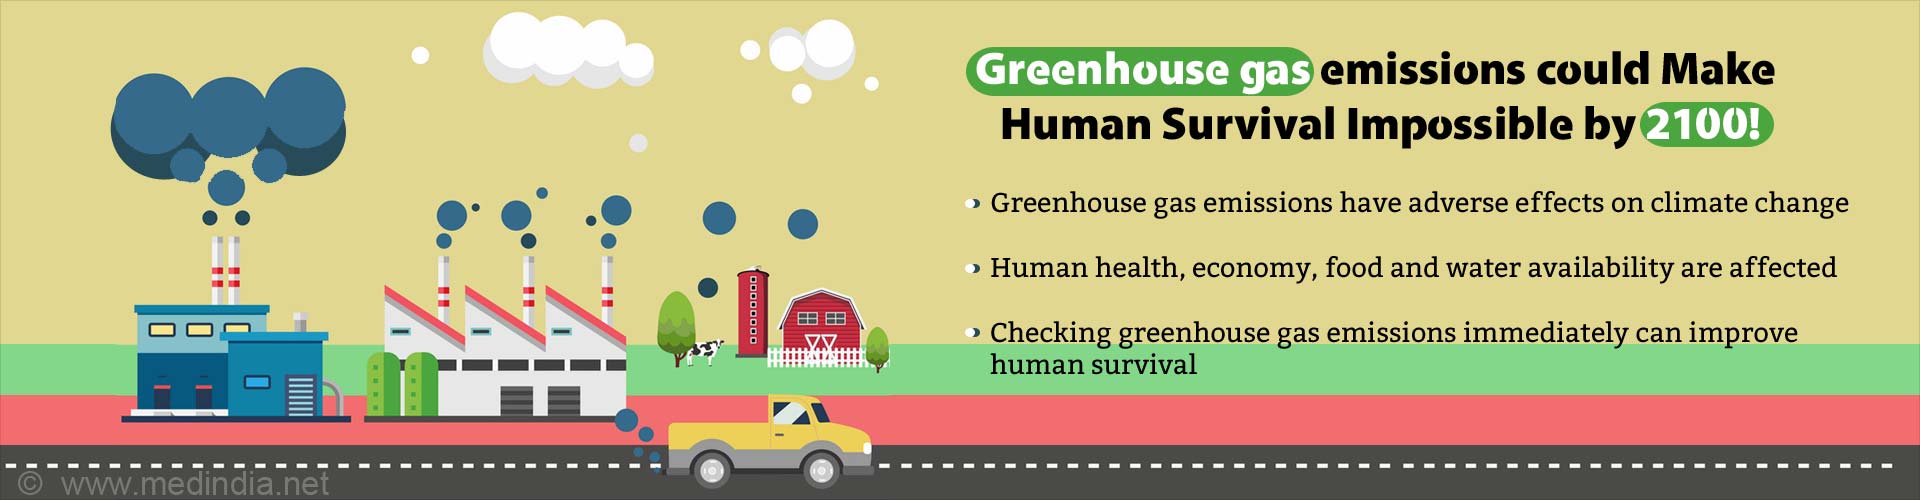 Greenhouse gas emissions could make human survival impossible by 2100. Greenhouse gas emissions have adverse effects on climate change. Human health, economy, food and water availability are affected. Checking greenhouse gas emissions immediately can improve human survival. 